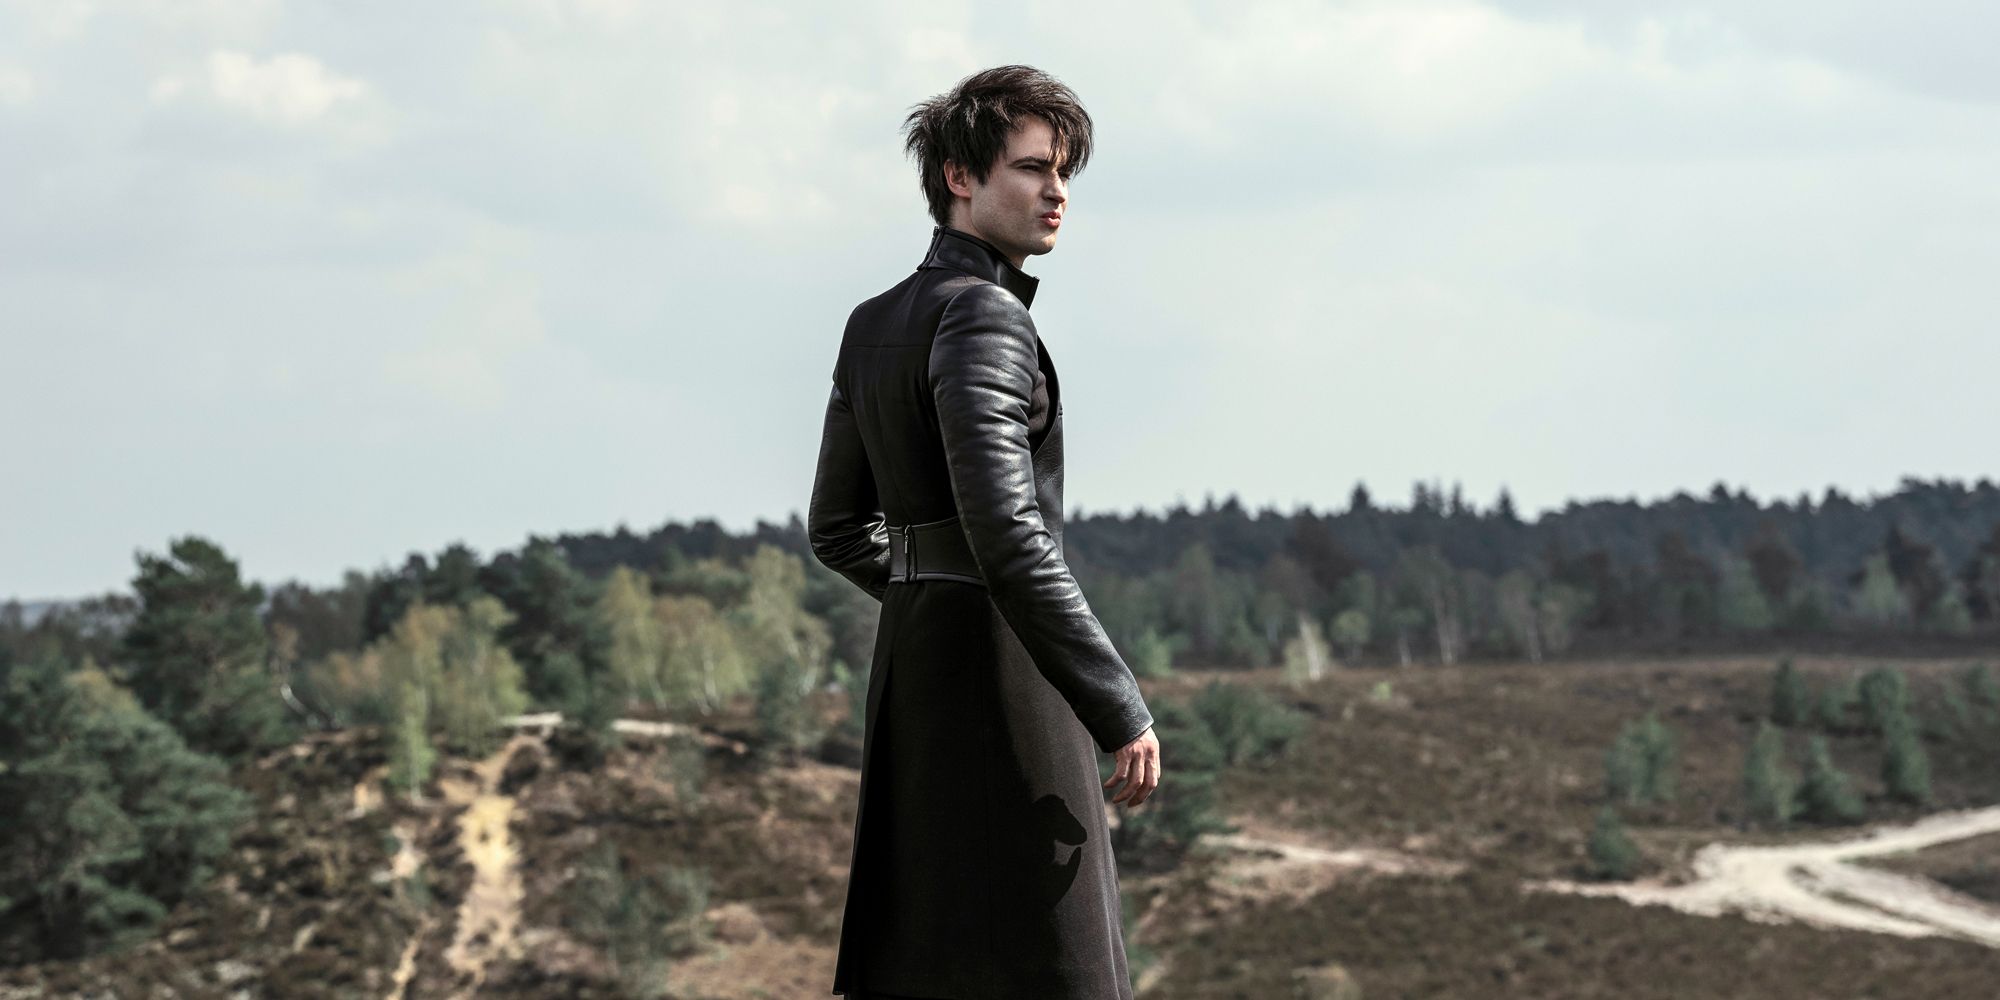 Lord Morpheus/Dream, played by Tom Sturridge, wearing an all-black outfit for the show The Sandman. 